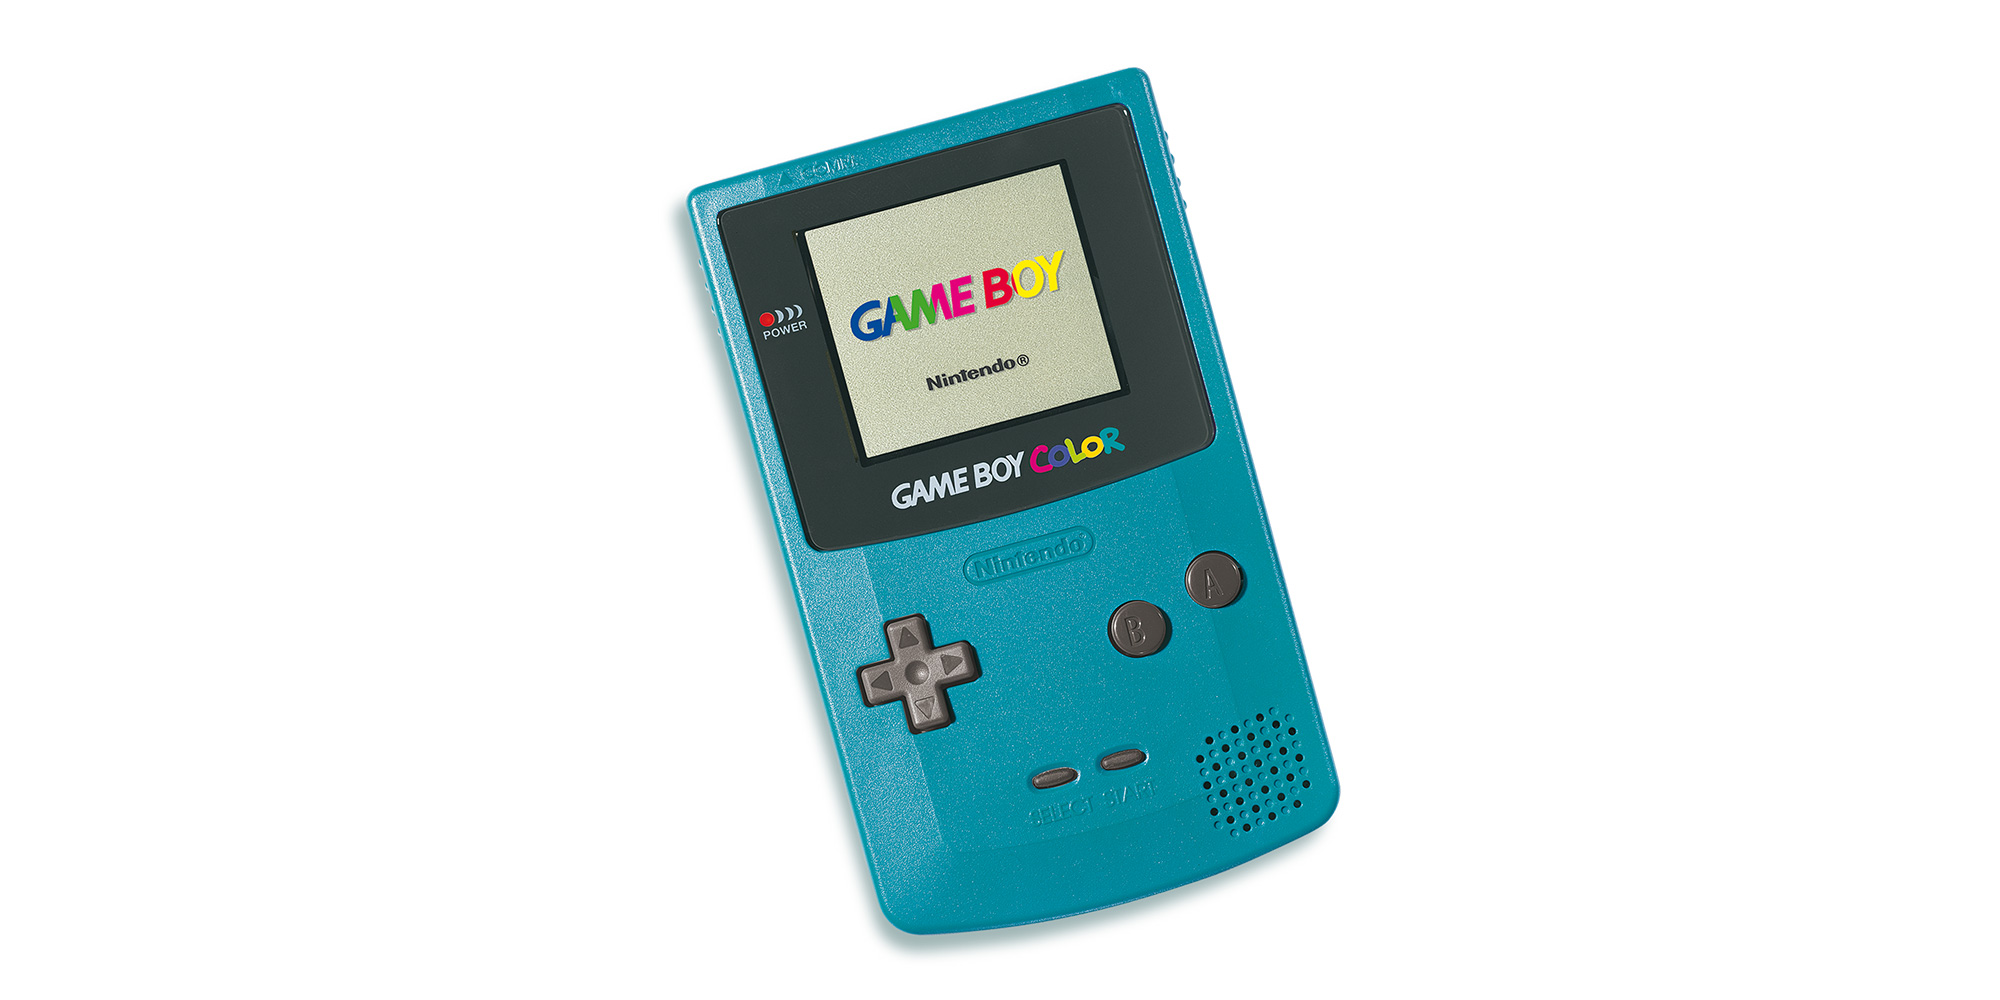 Support for Game Boy Color, Support